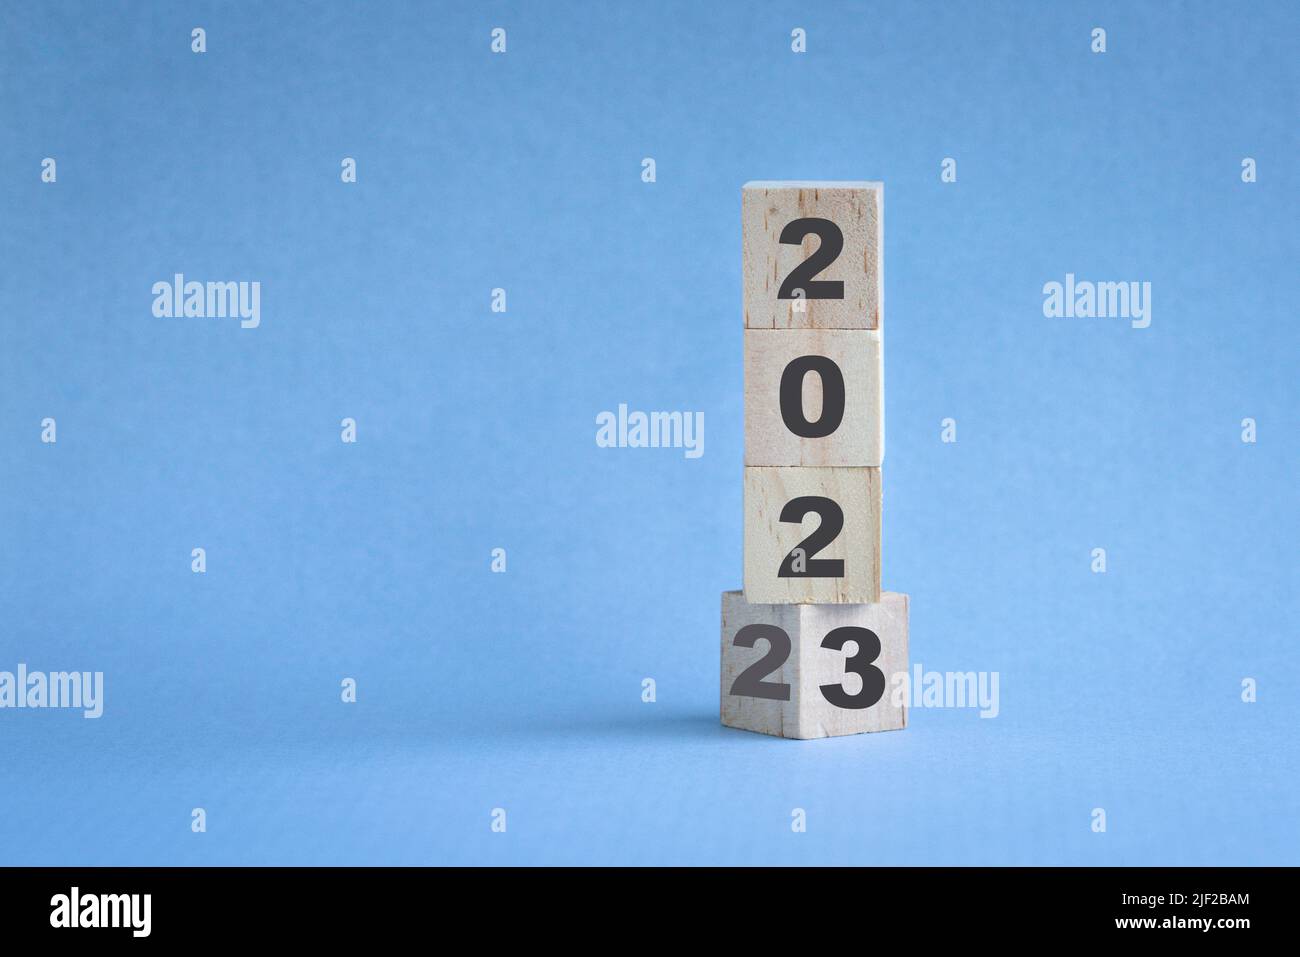 Wooden cube stock stacked, change from 2022 to 2023. Blue color background, with copy space. Stock Photo